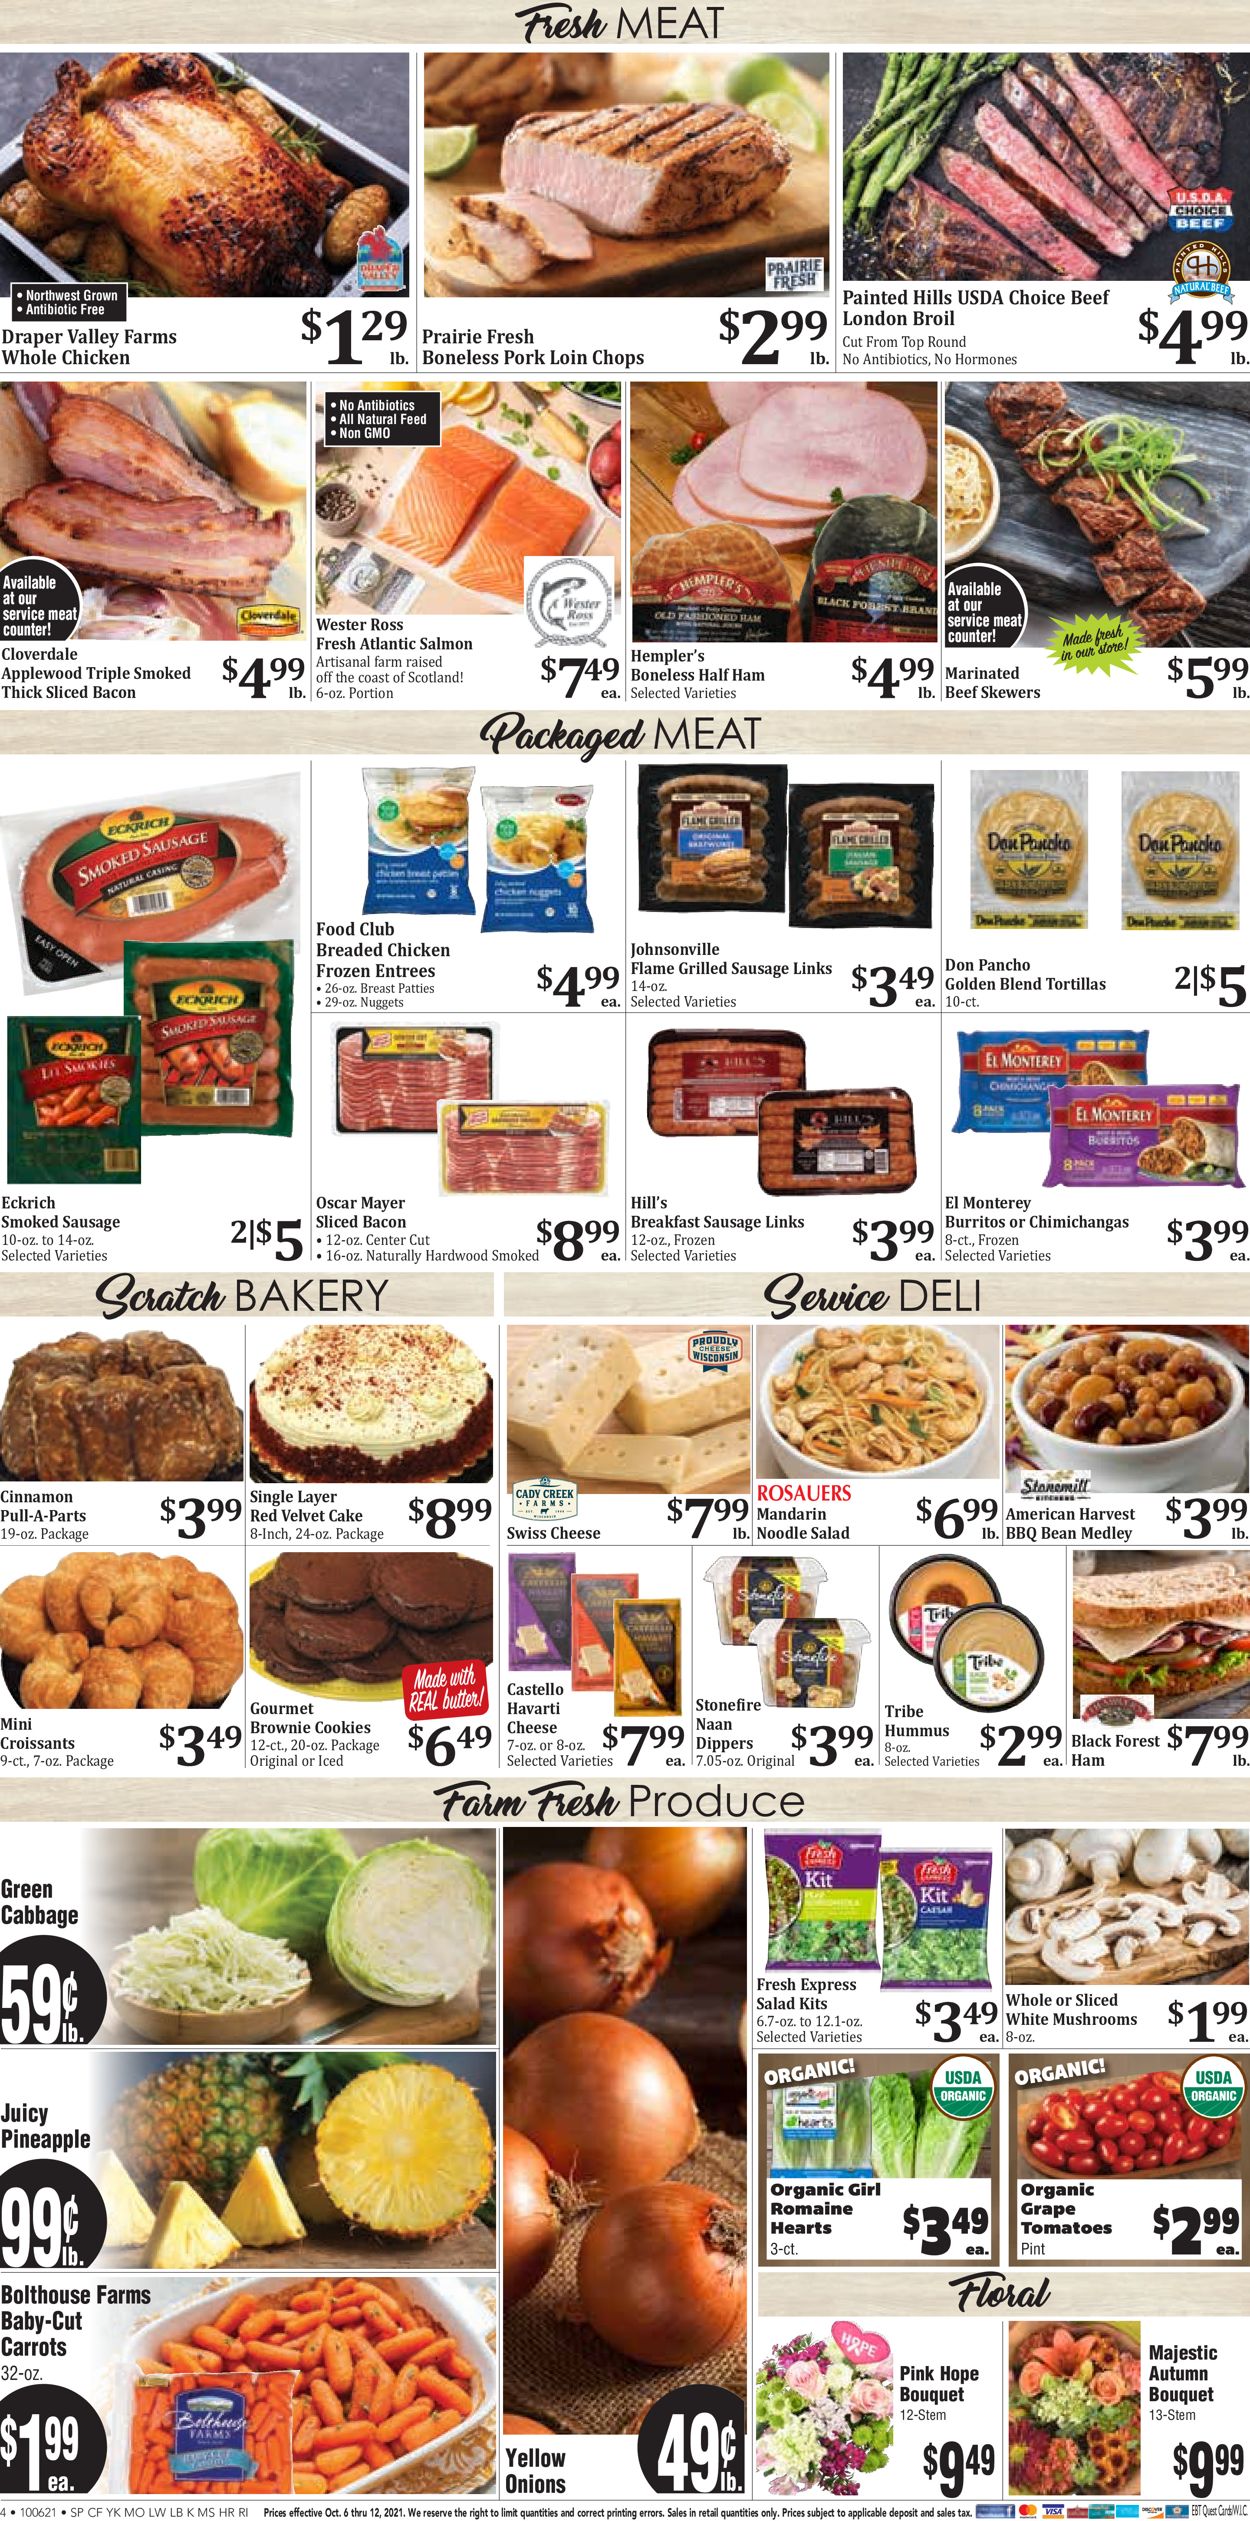 Rosauers Ad from 10/06/2021